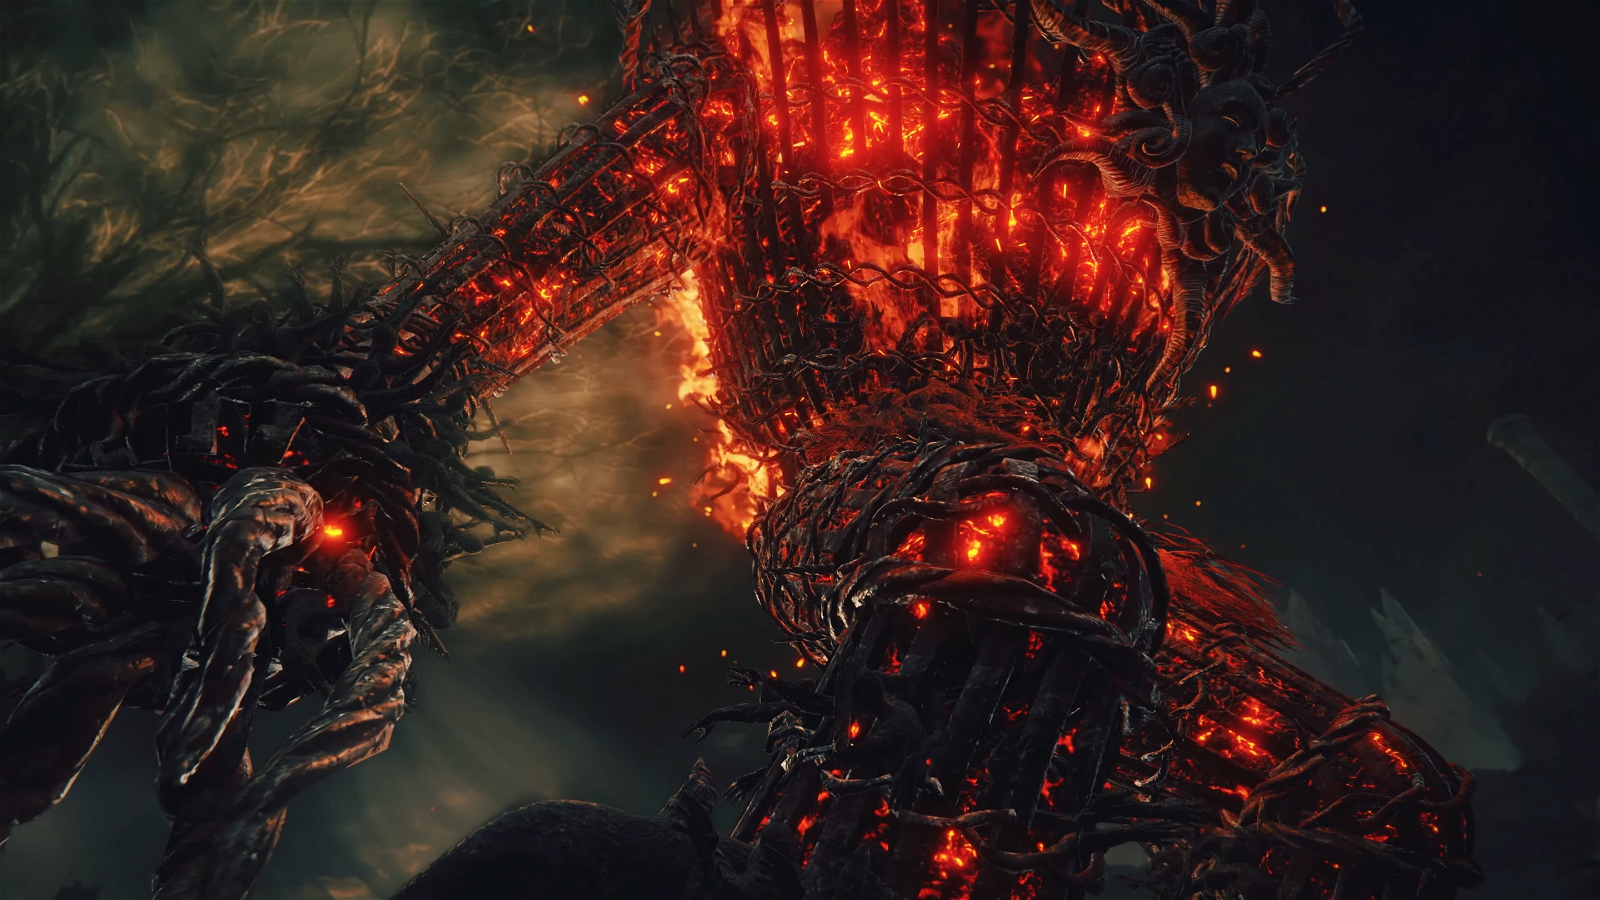 Shadow of the Erdtree's Fire Golem sends chills down your spine